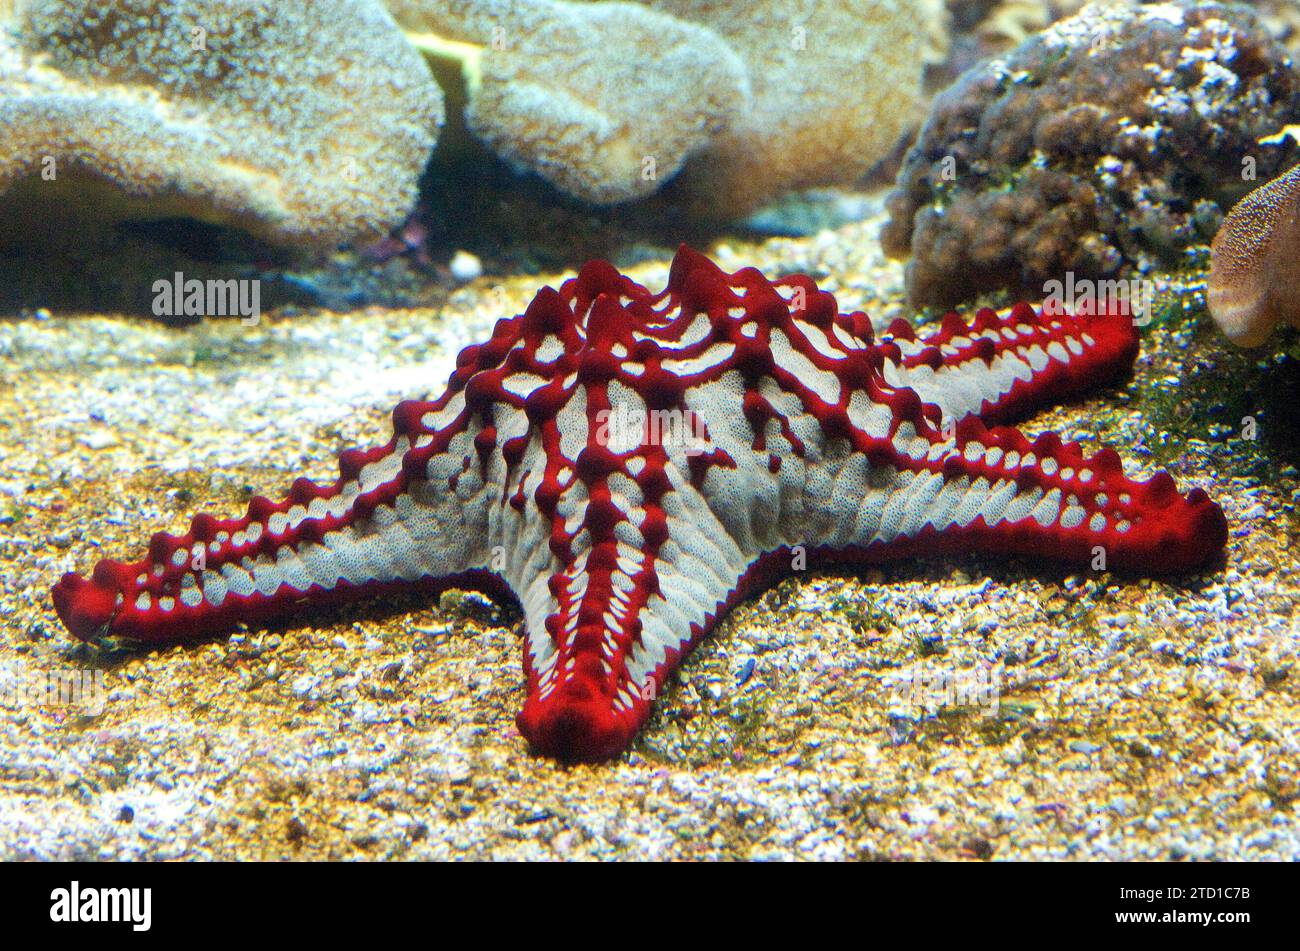 Red knob sea star (Protoreaster linckii) is a carnivore starfish native to Indo-Pacific. Stock Photo